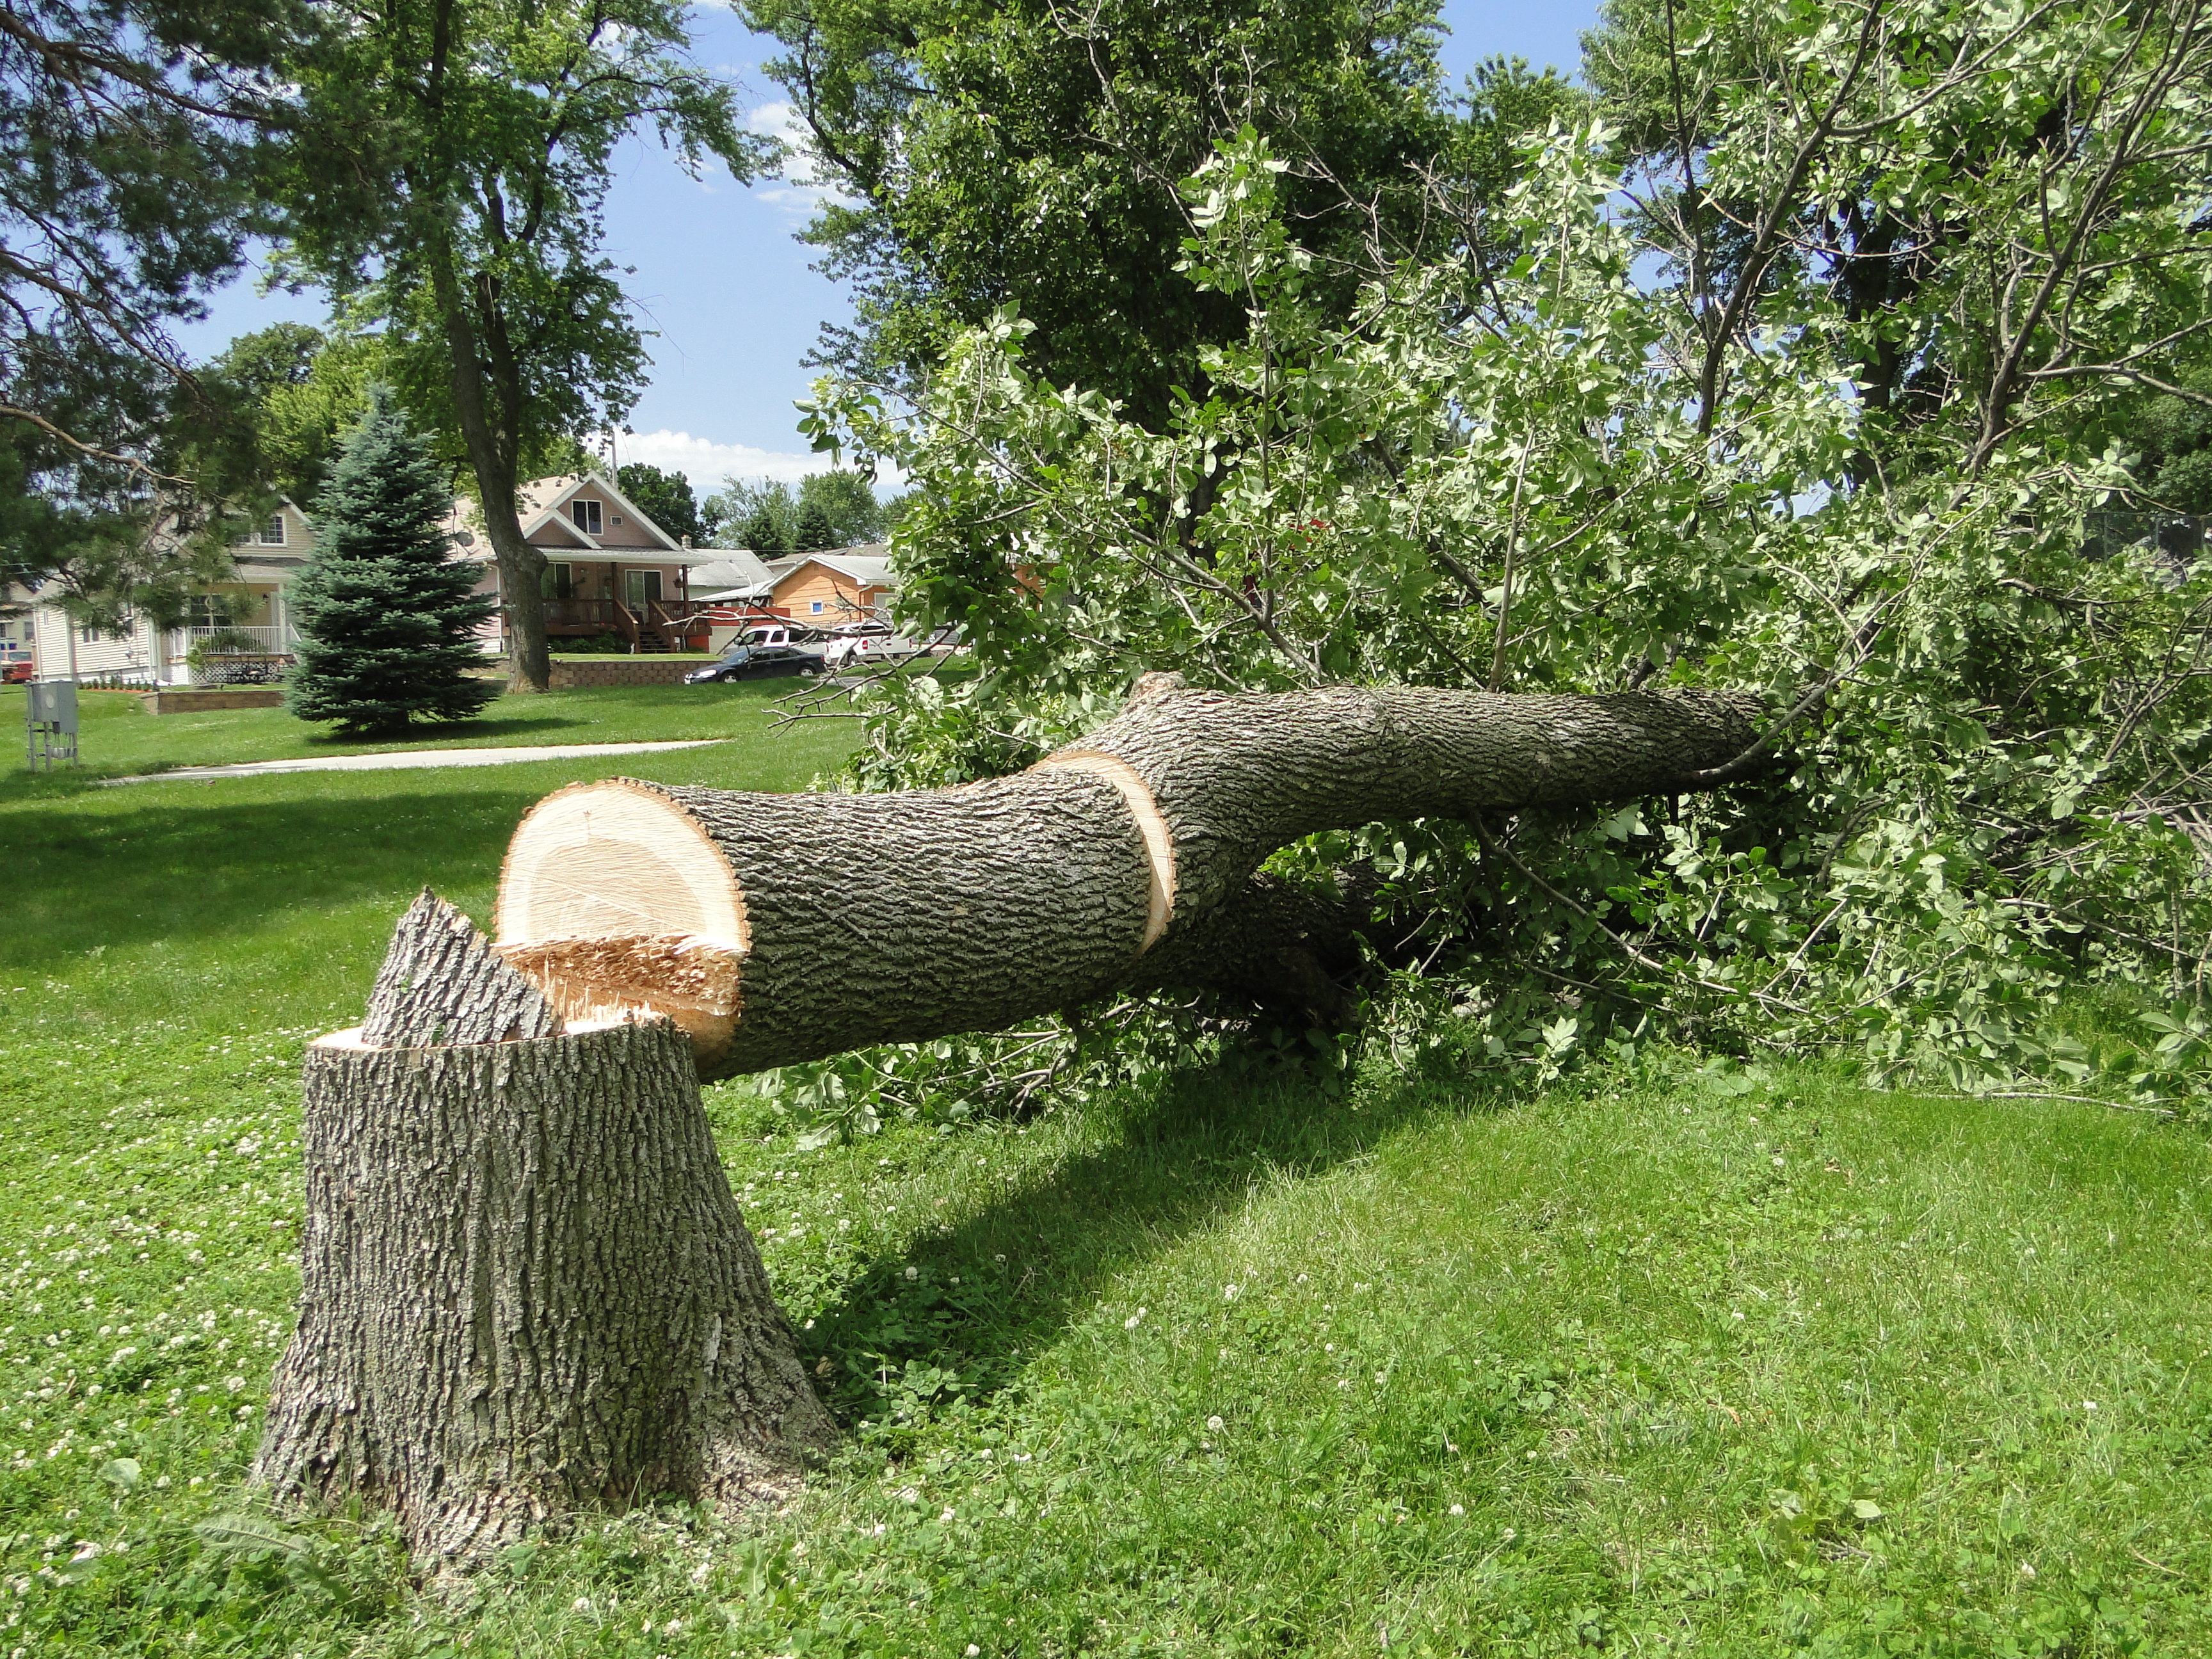 This is the first known tree in Nebraska to become infested with the emerald ash borer. 